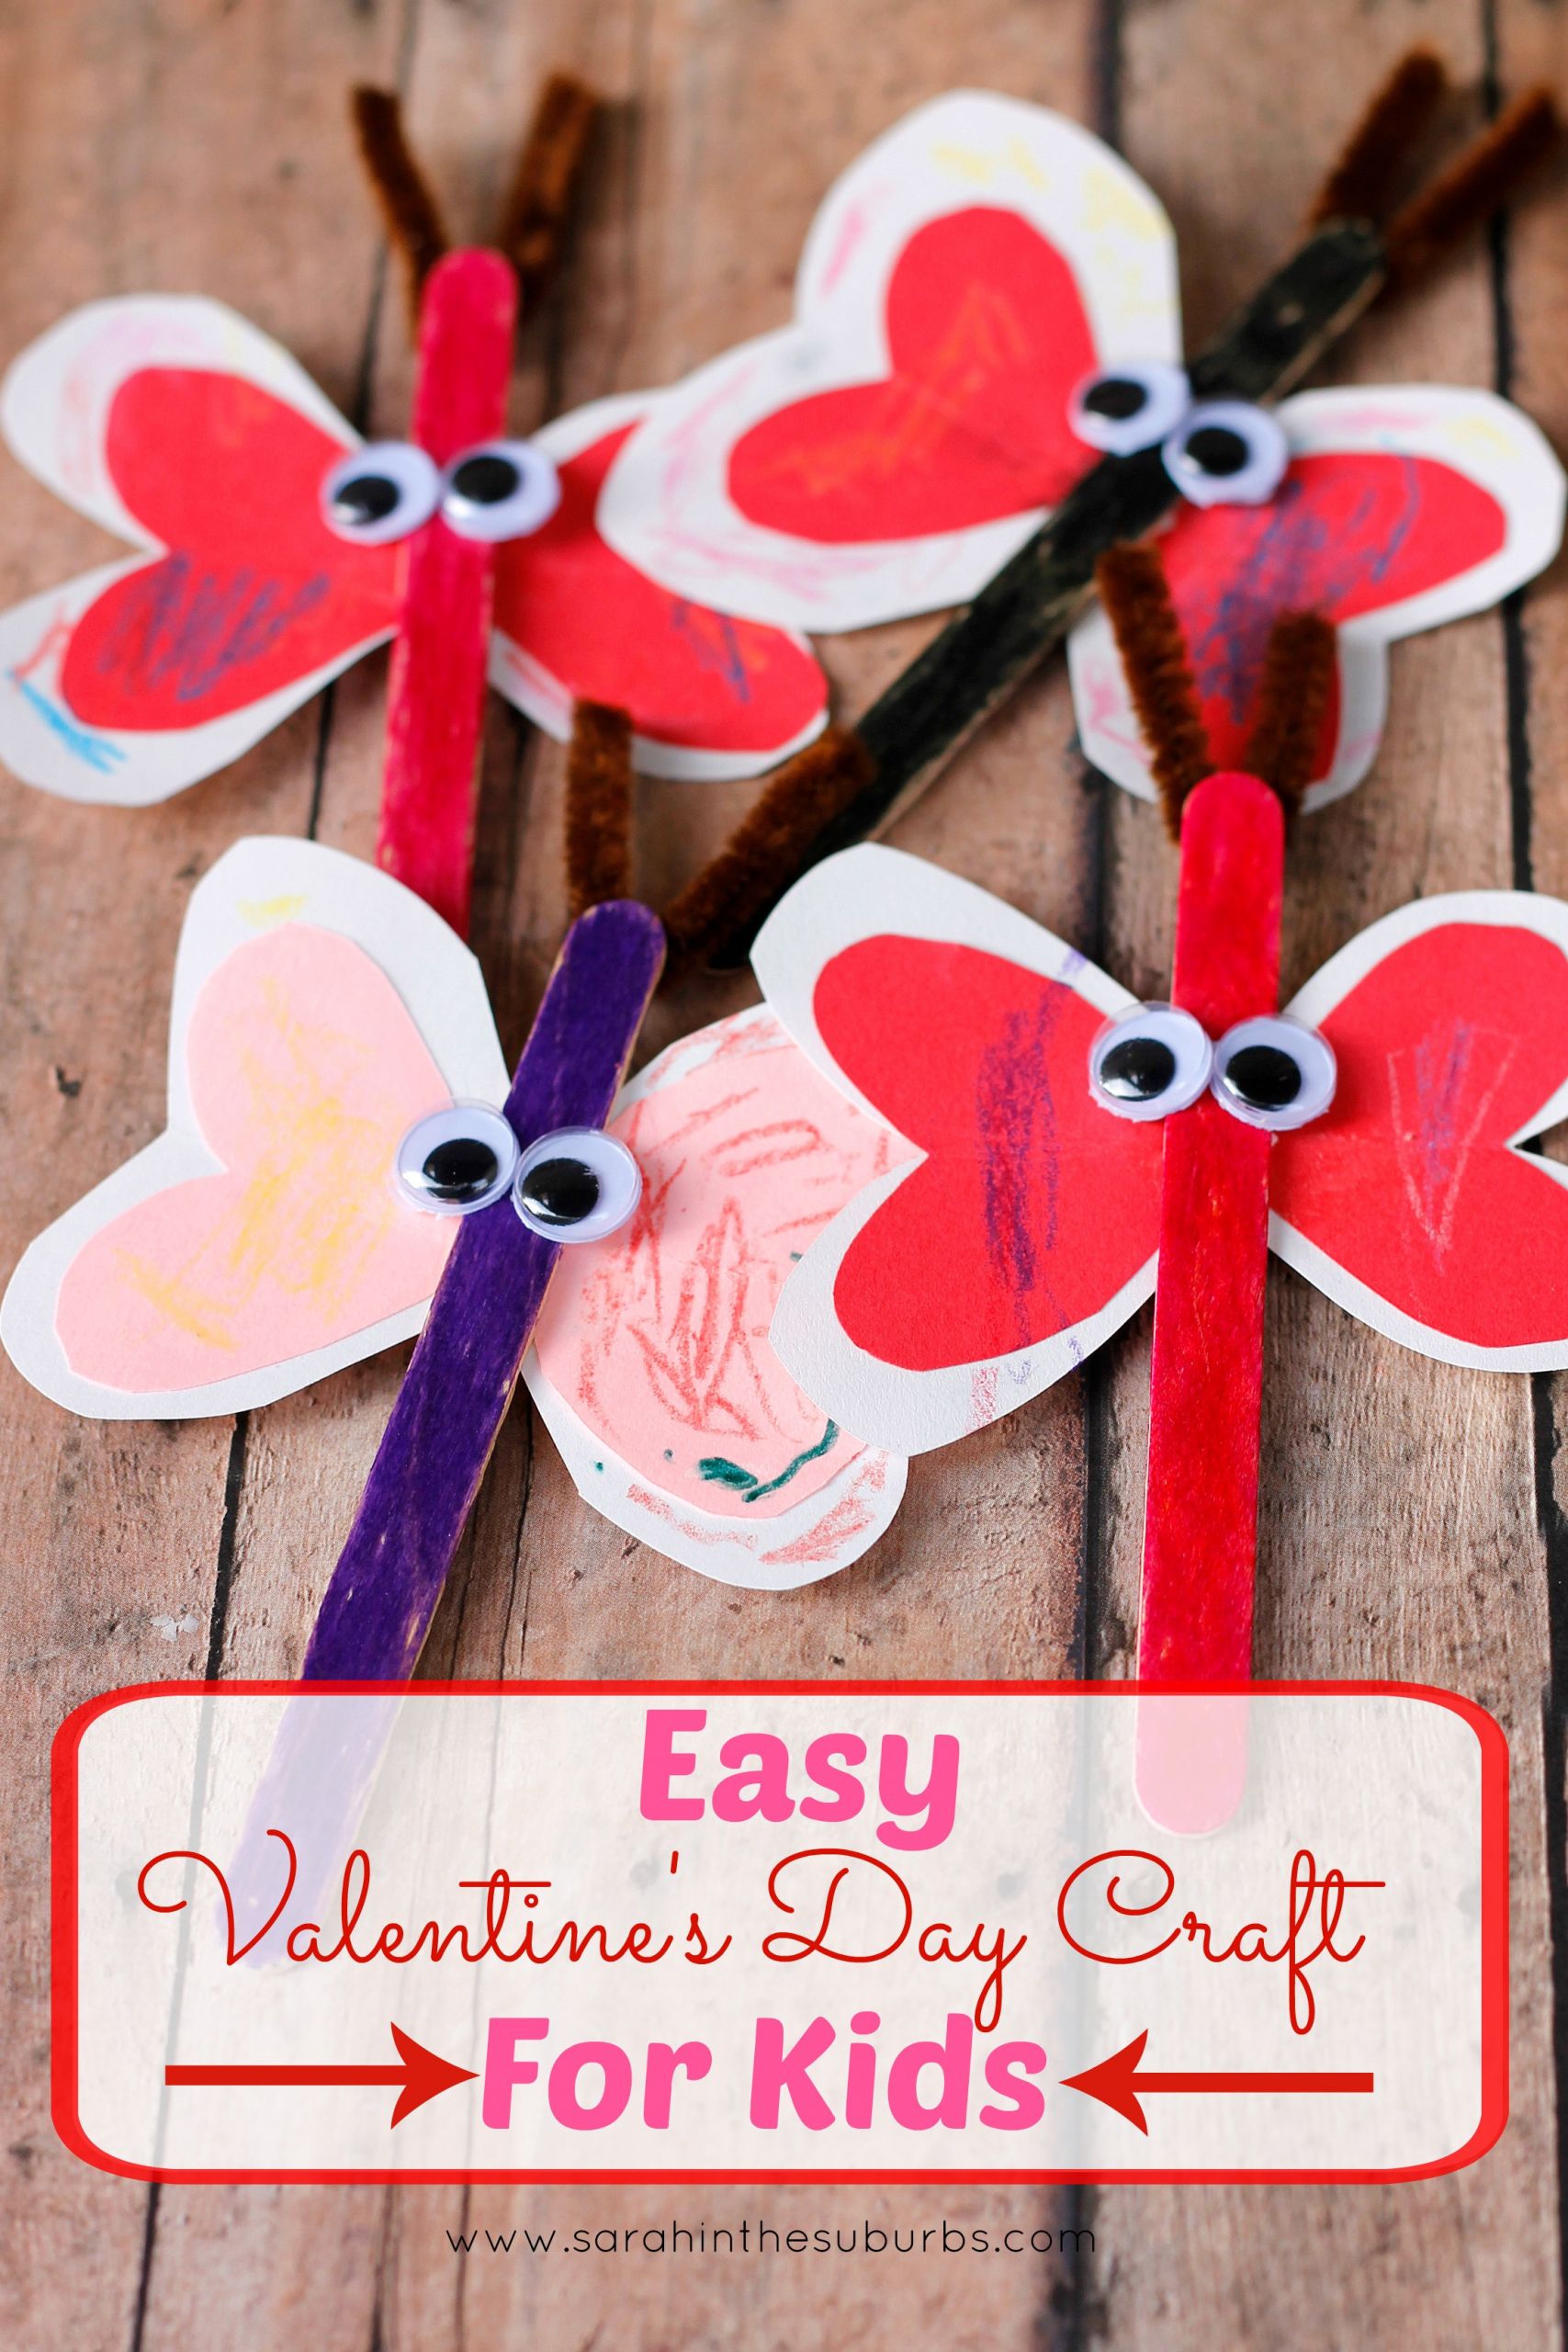 Valentines Day Crafts For Toddlers
 Love Bug Valentine s Day Craft for Kids Sarah in the Suburbs